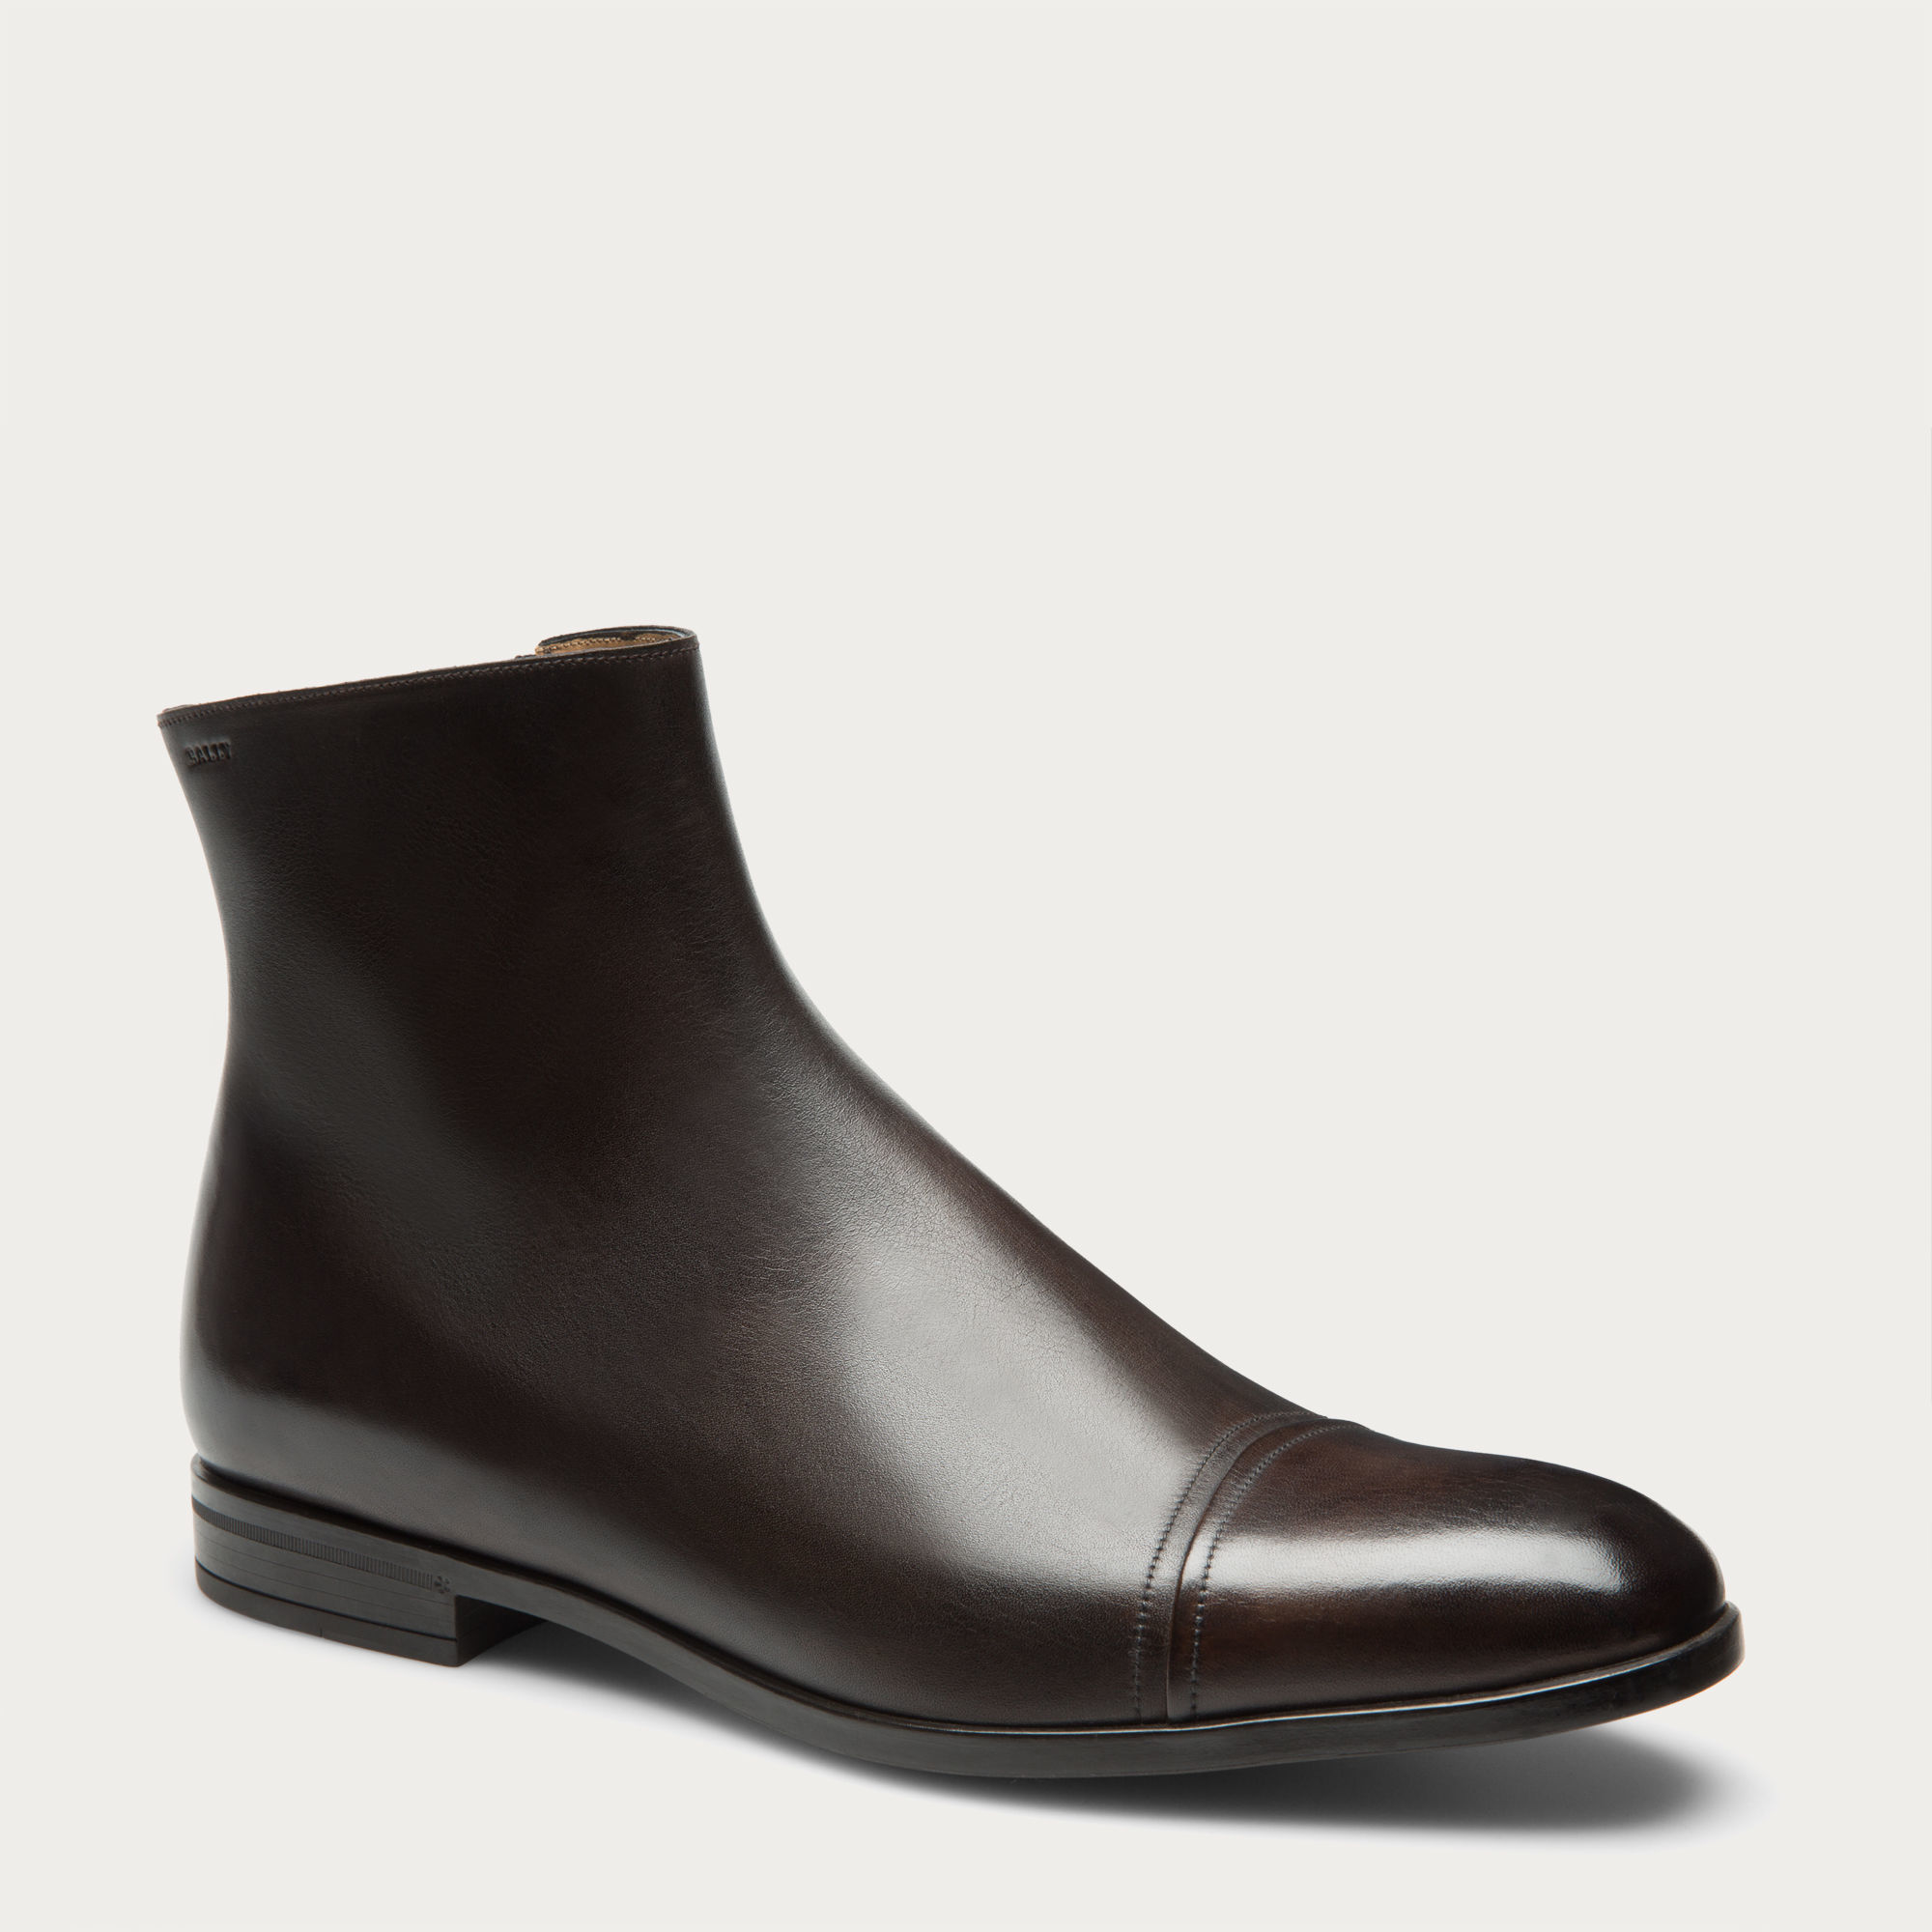 Bally Dress Leather Ankle Boots in Black for Men - Lyst